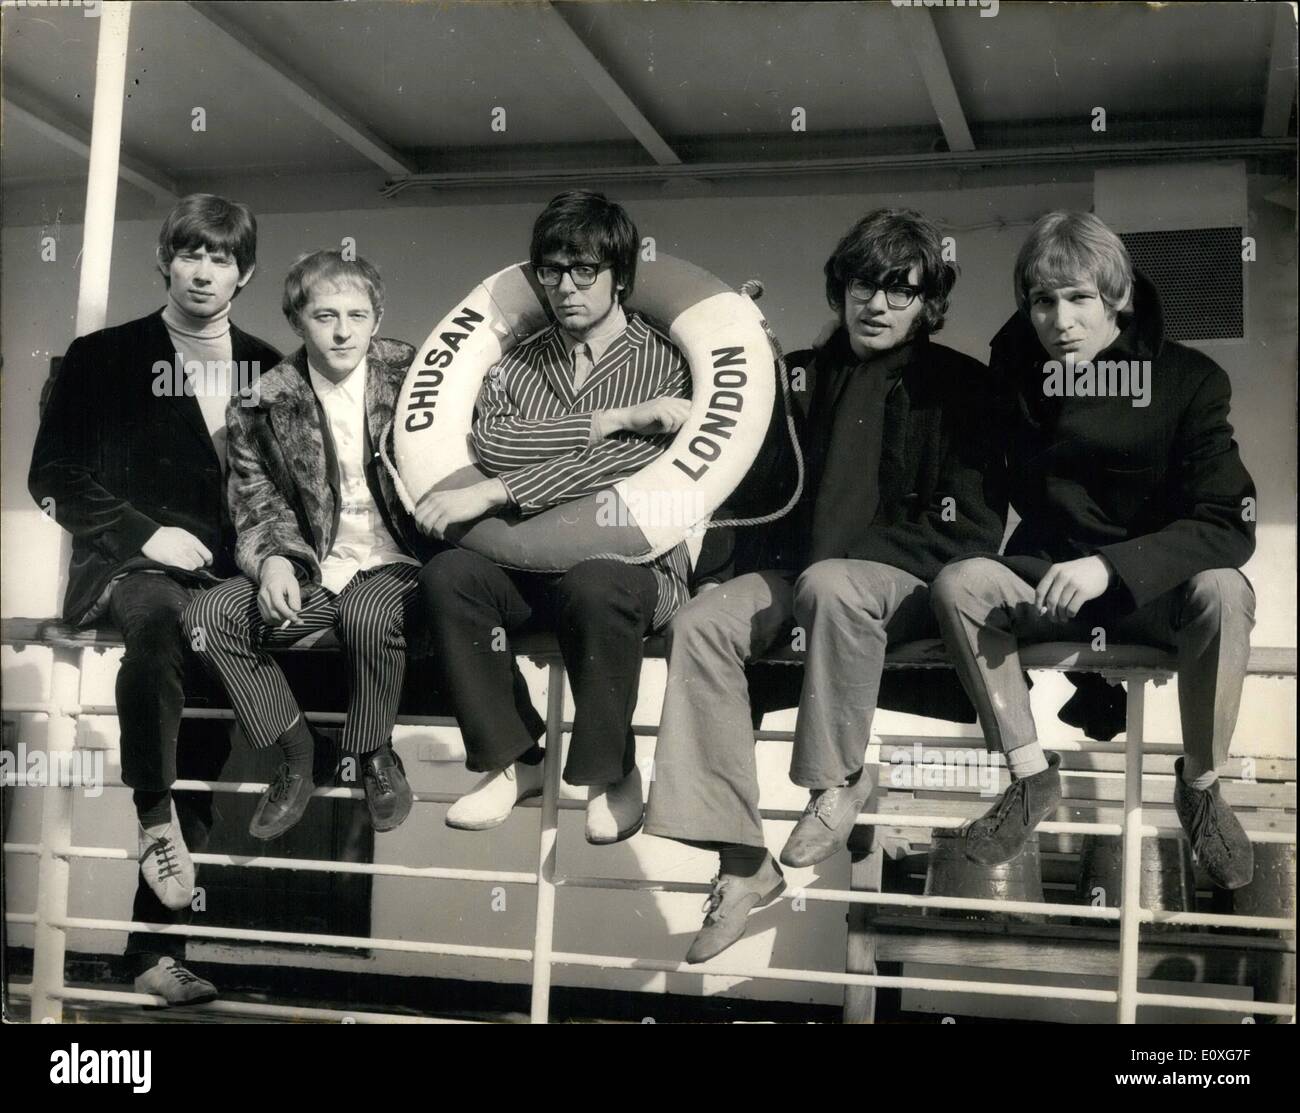 Nov. 11, 1966 - Manfred Mann Group set off on a three weeks Cruise of the West Indies: The Manfred Mann pop group plus wives and children sailed from Southampton today on board the liner ''Chusan'' for a three week West Indies cruise when they will entertain the passengers and play a number of engagements at ports of call during the cruise. Photo shows the Manfred Mann group on board the liner Chusan at Southampton today. (L to R) Klaus Voorman, McGuiness and the new singer Michael D'abo. Stock Photo